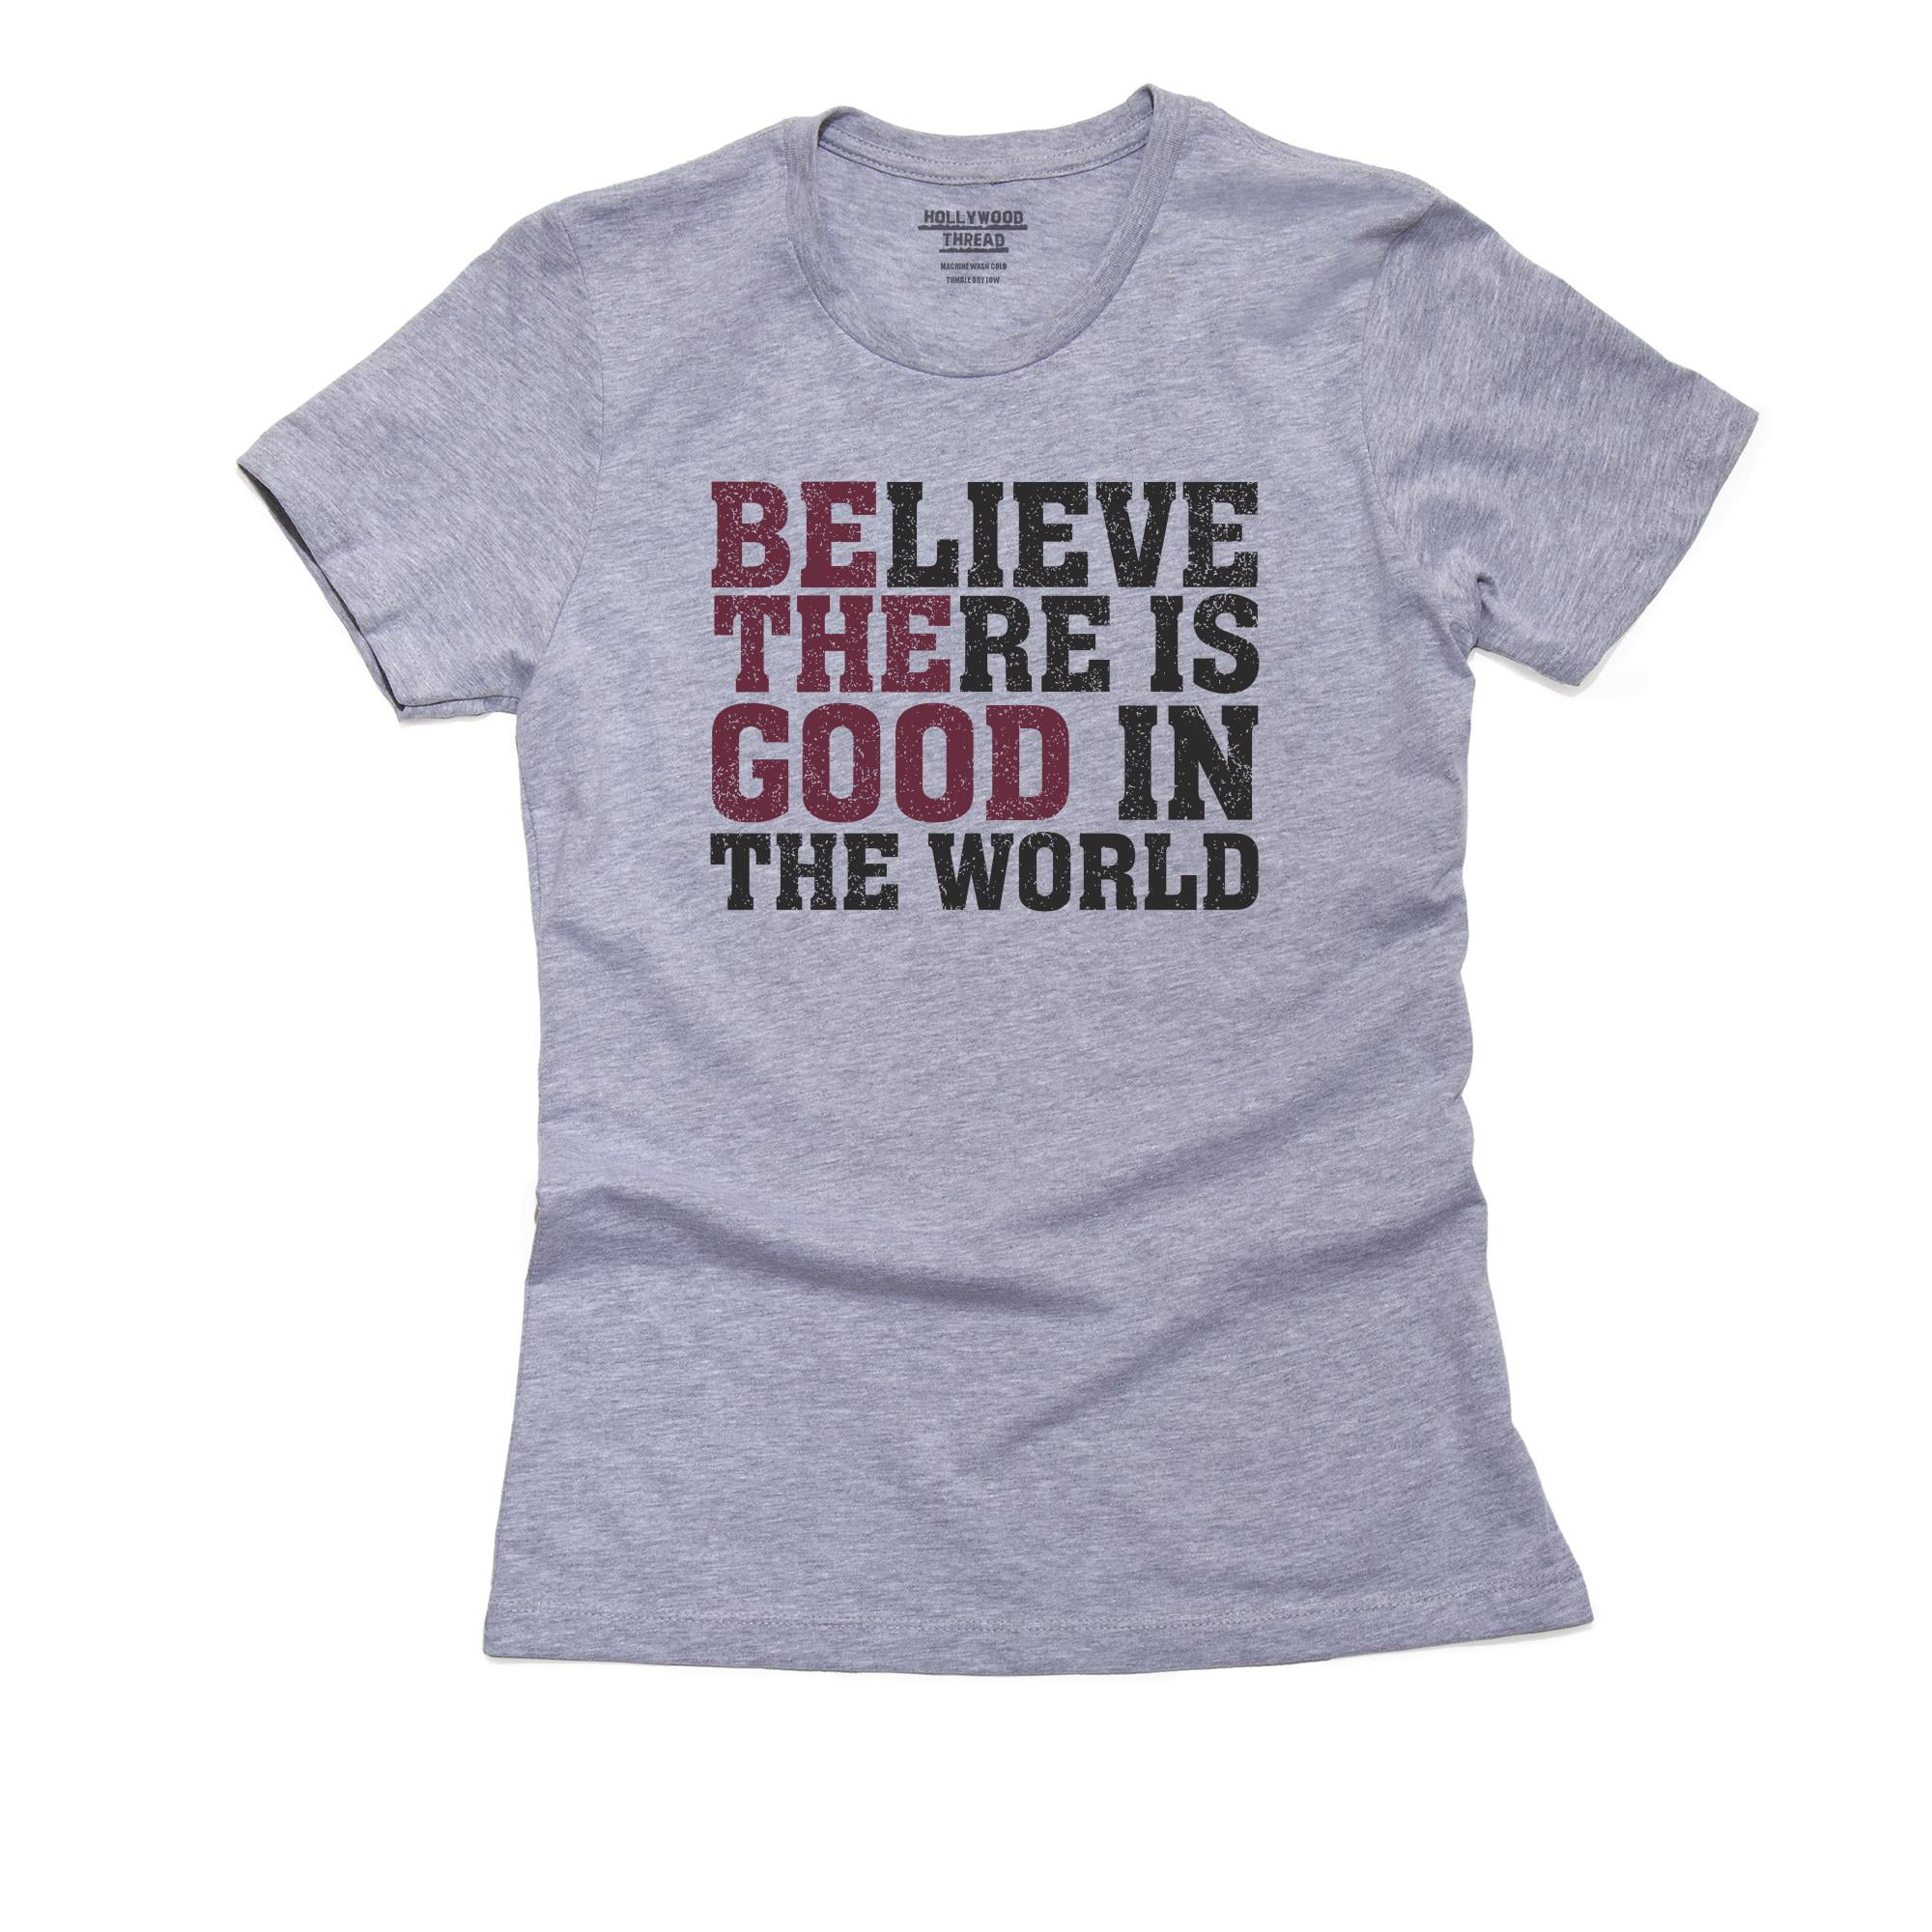 Believe There Good In The World Women's Grey T-Shirt - Walmart.com